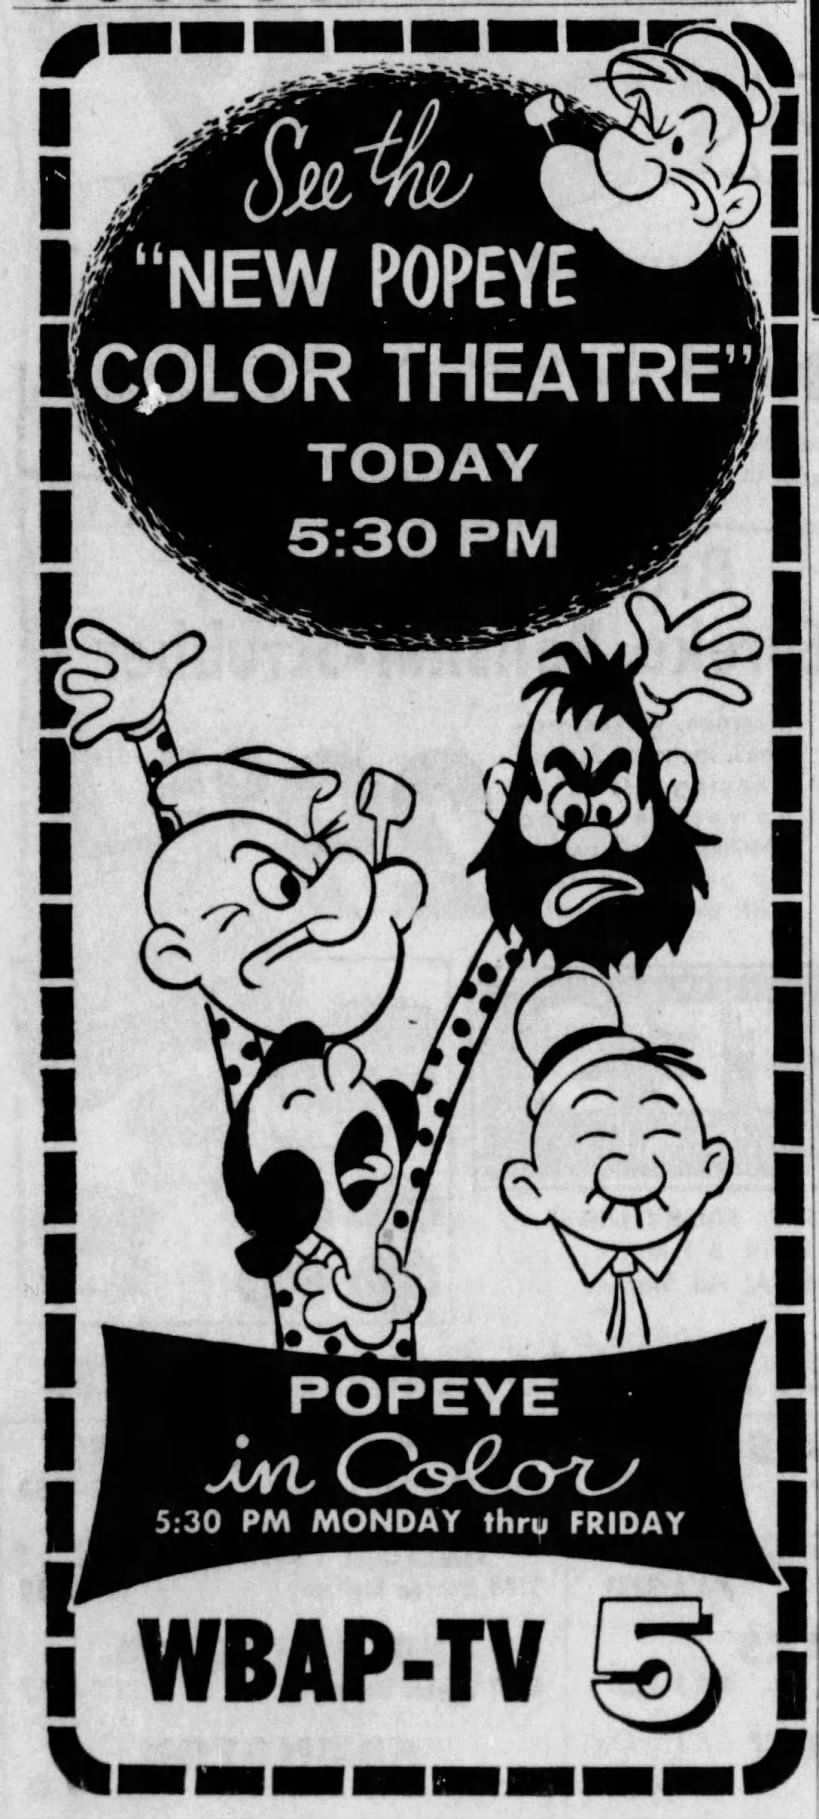 Newspaper advertisement for “Popeye in color”